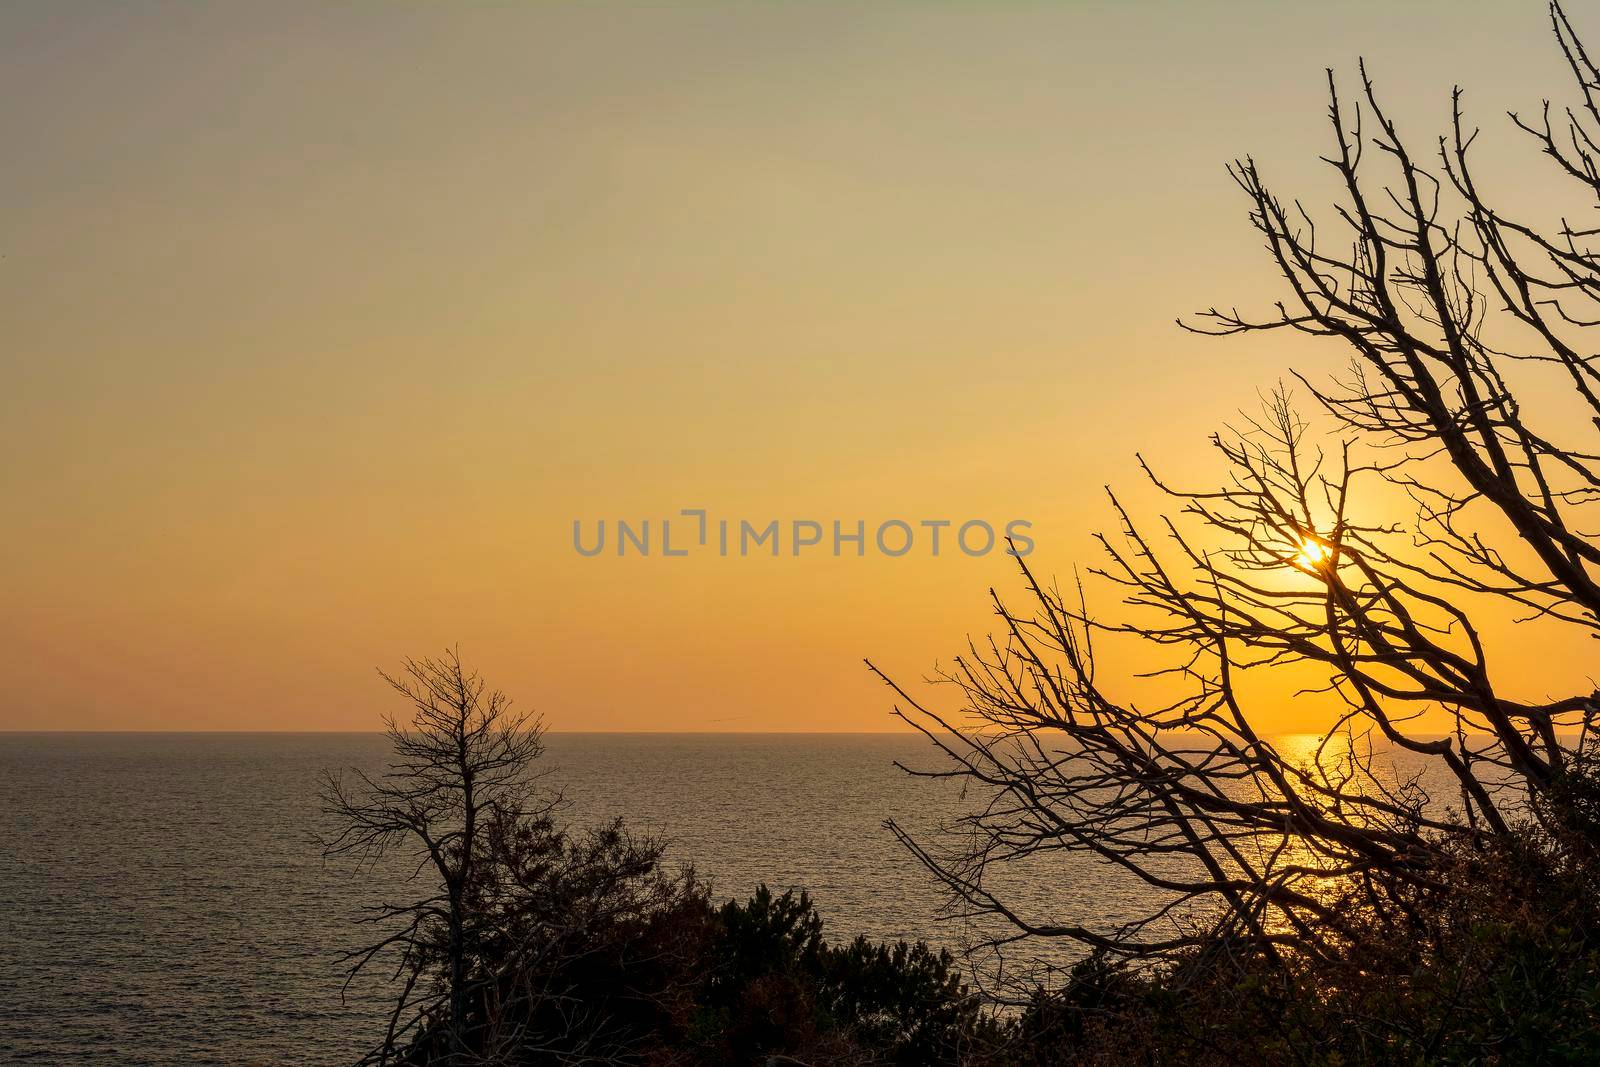 Tree at sunset in Palaiokastro castle of ancient Pylos by ankarb